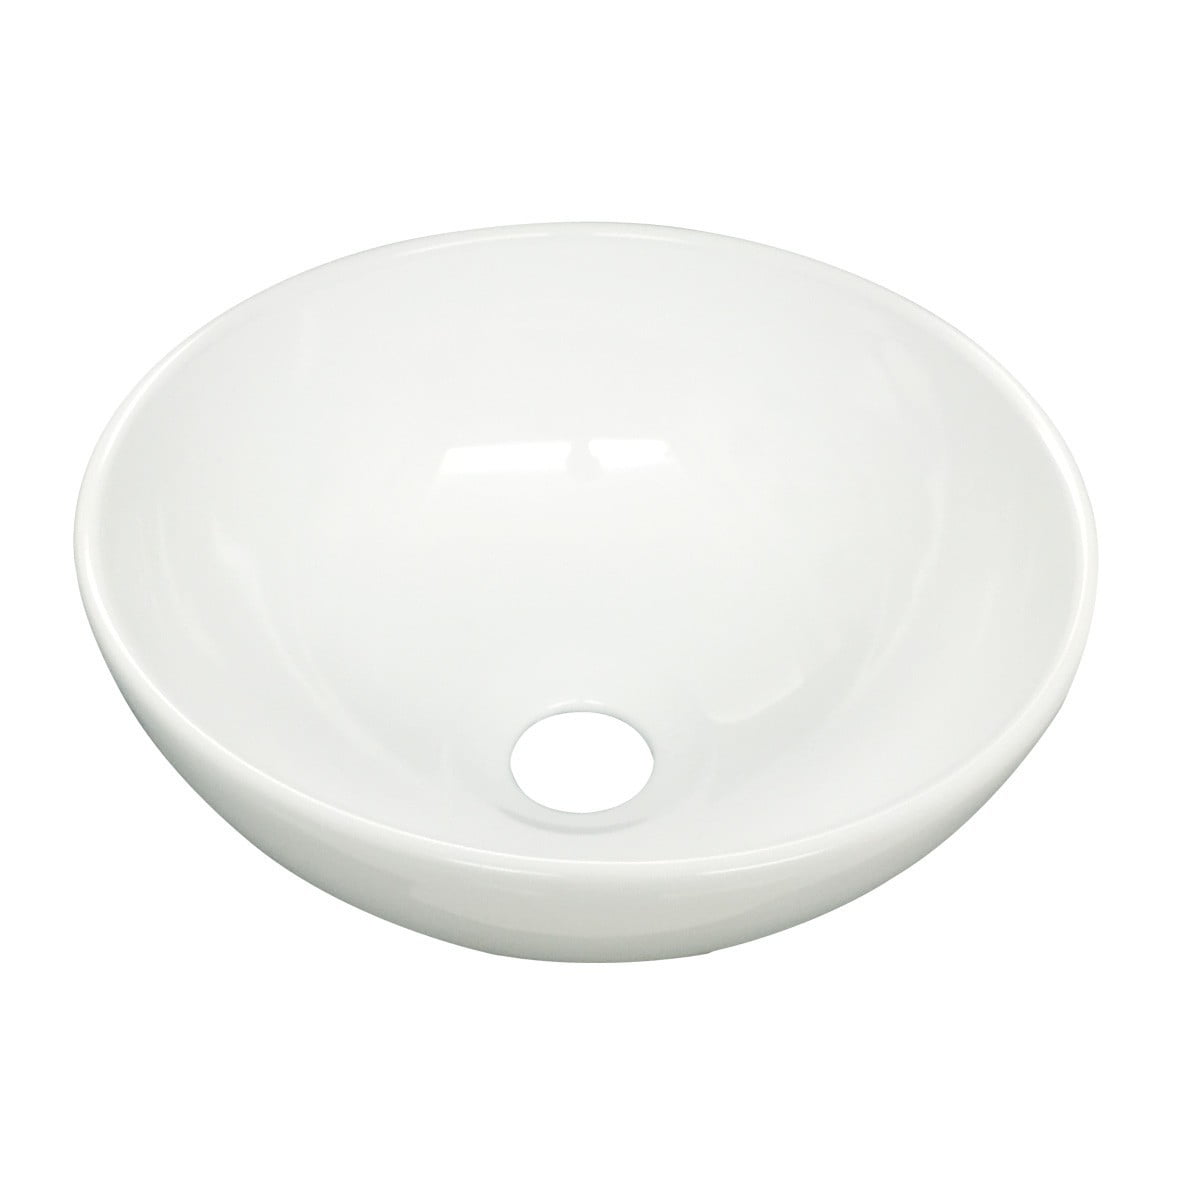 White Small Vessel Sink Above Counter Round Porcelain 11 25 Inches Dia Set Of 2